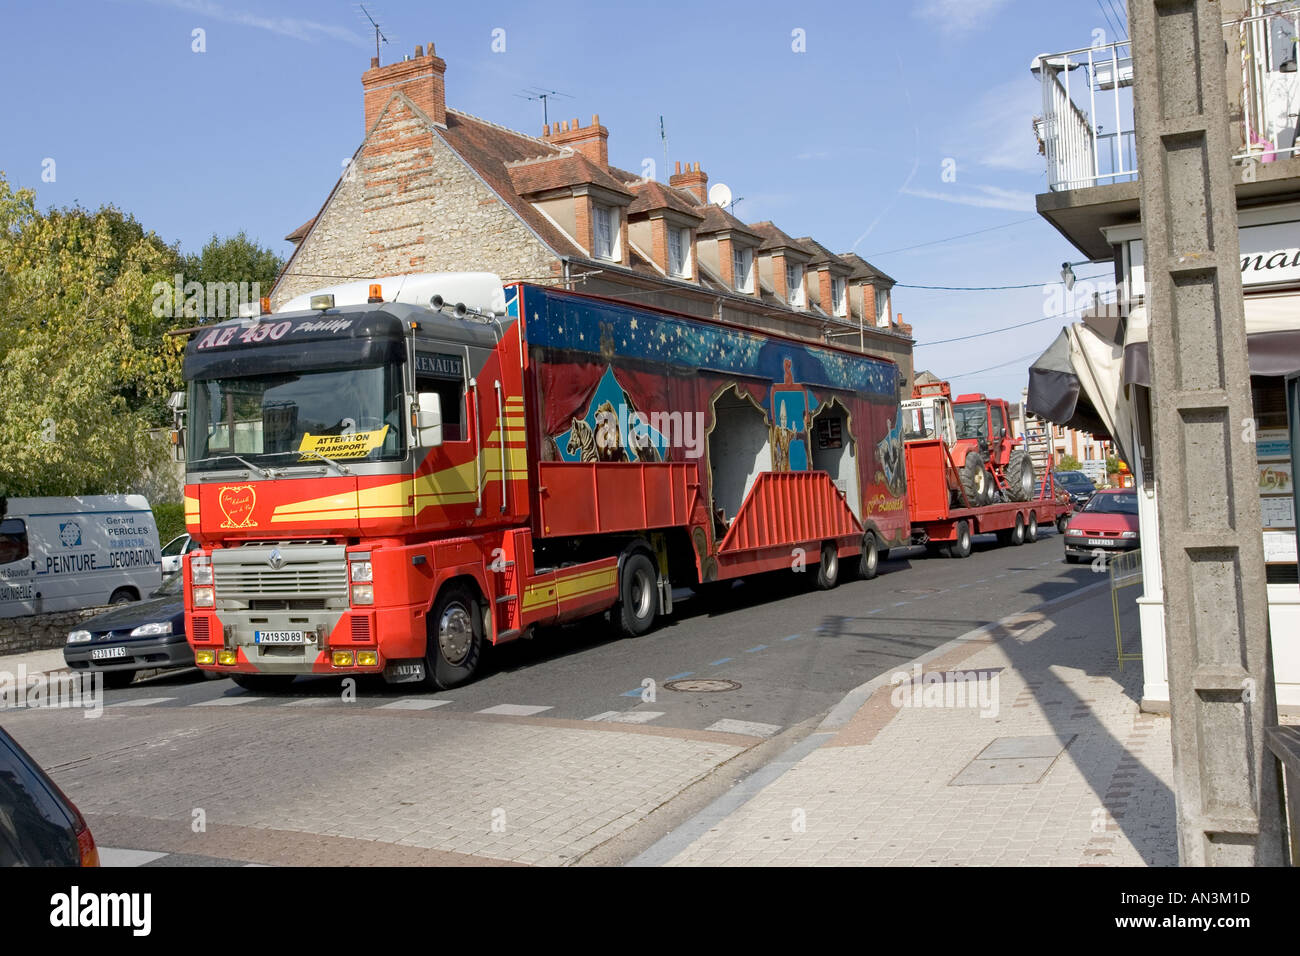 Huge red circus trucks and trailers blocking traffic in narrow streets of Chateauneuf sur Loire France Stock Photo